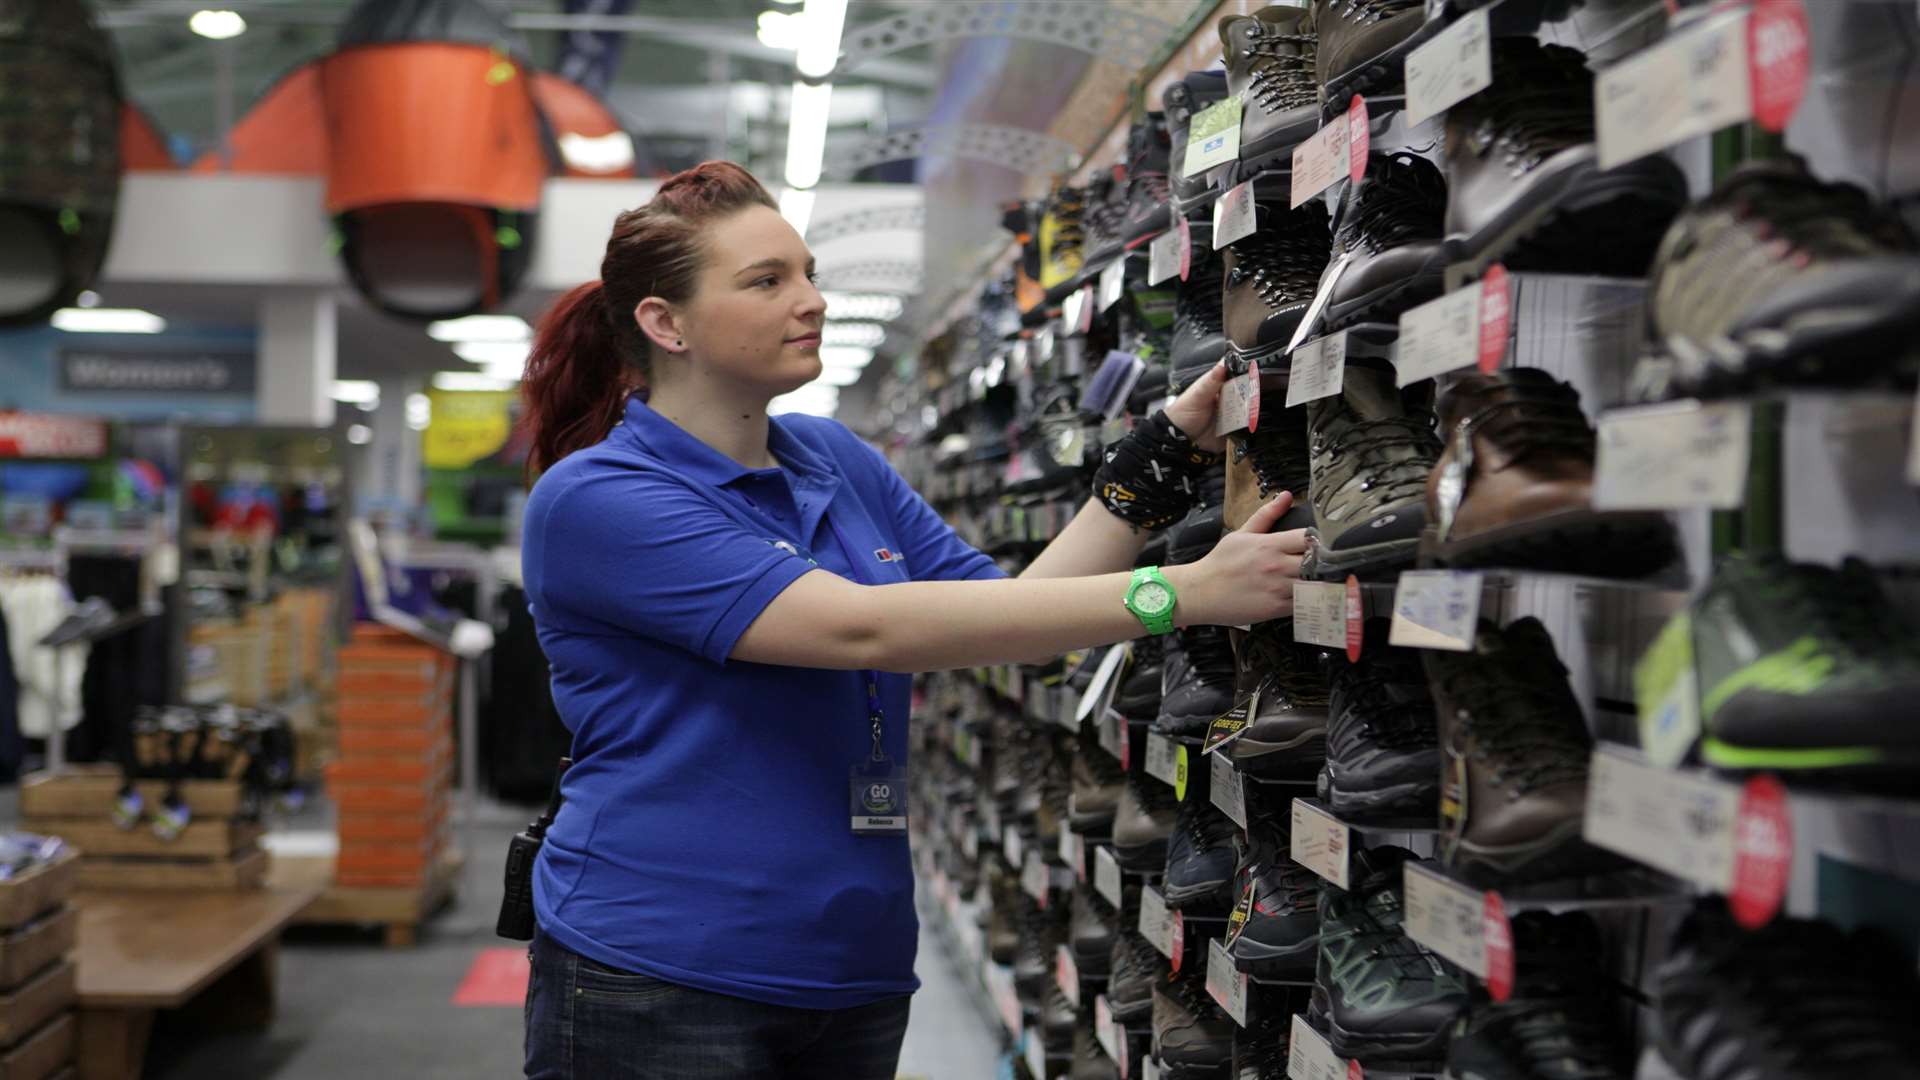 GO Outdoors was established in 1998 and now has 48 shops in the UK, employing more than 1,800 people.